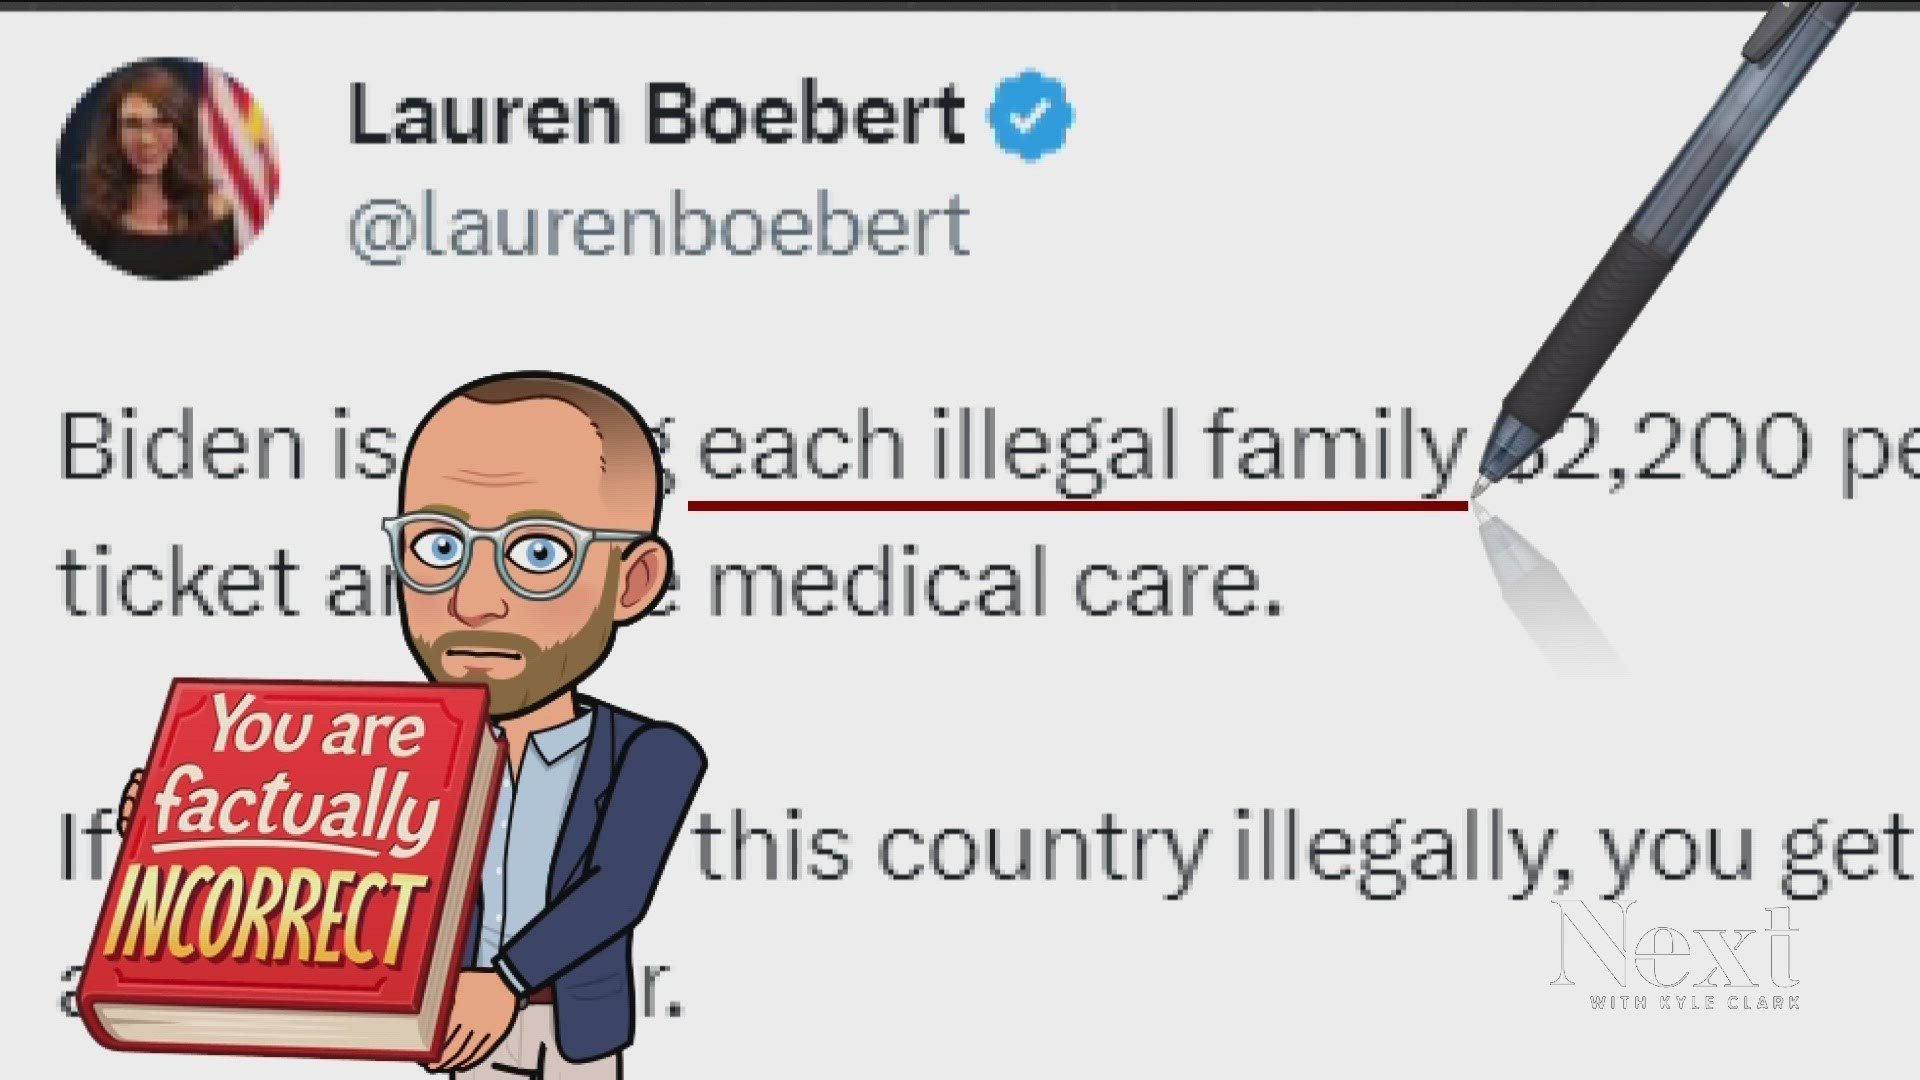 Migrants are not getting thousands of dollars a month in payments from the government, as Colorado U.S. Rep. Lauren Boebert claimed online.